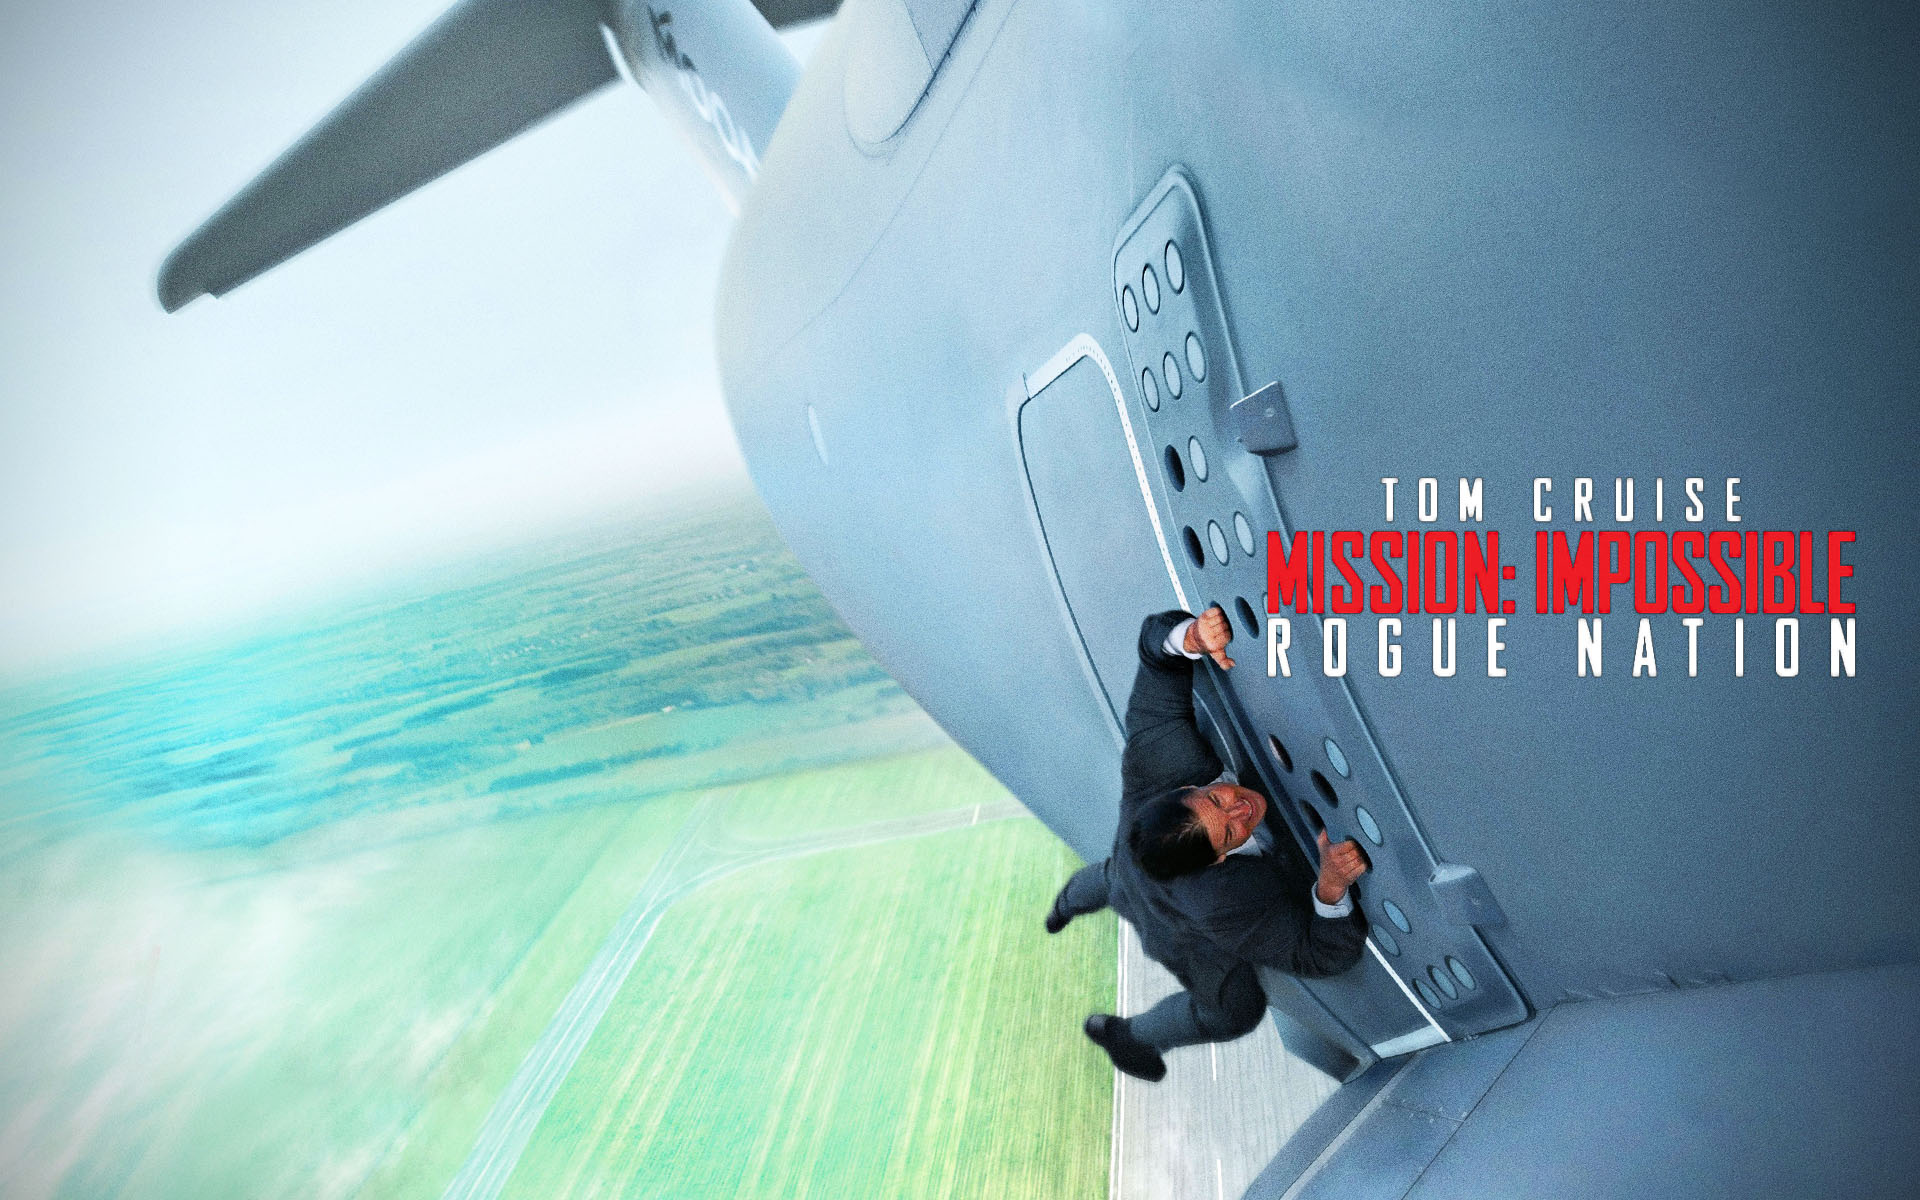 Free download Mission: Impossible 5 Rogue Nation wallpapers for your computer, Epic franchise visuals, Tom Cruise's iconic role, 1920x1200 HD Desktop